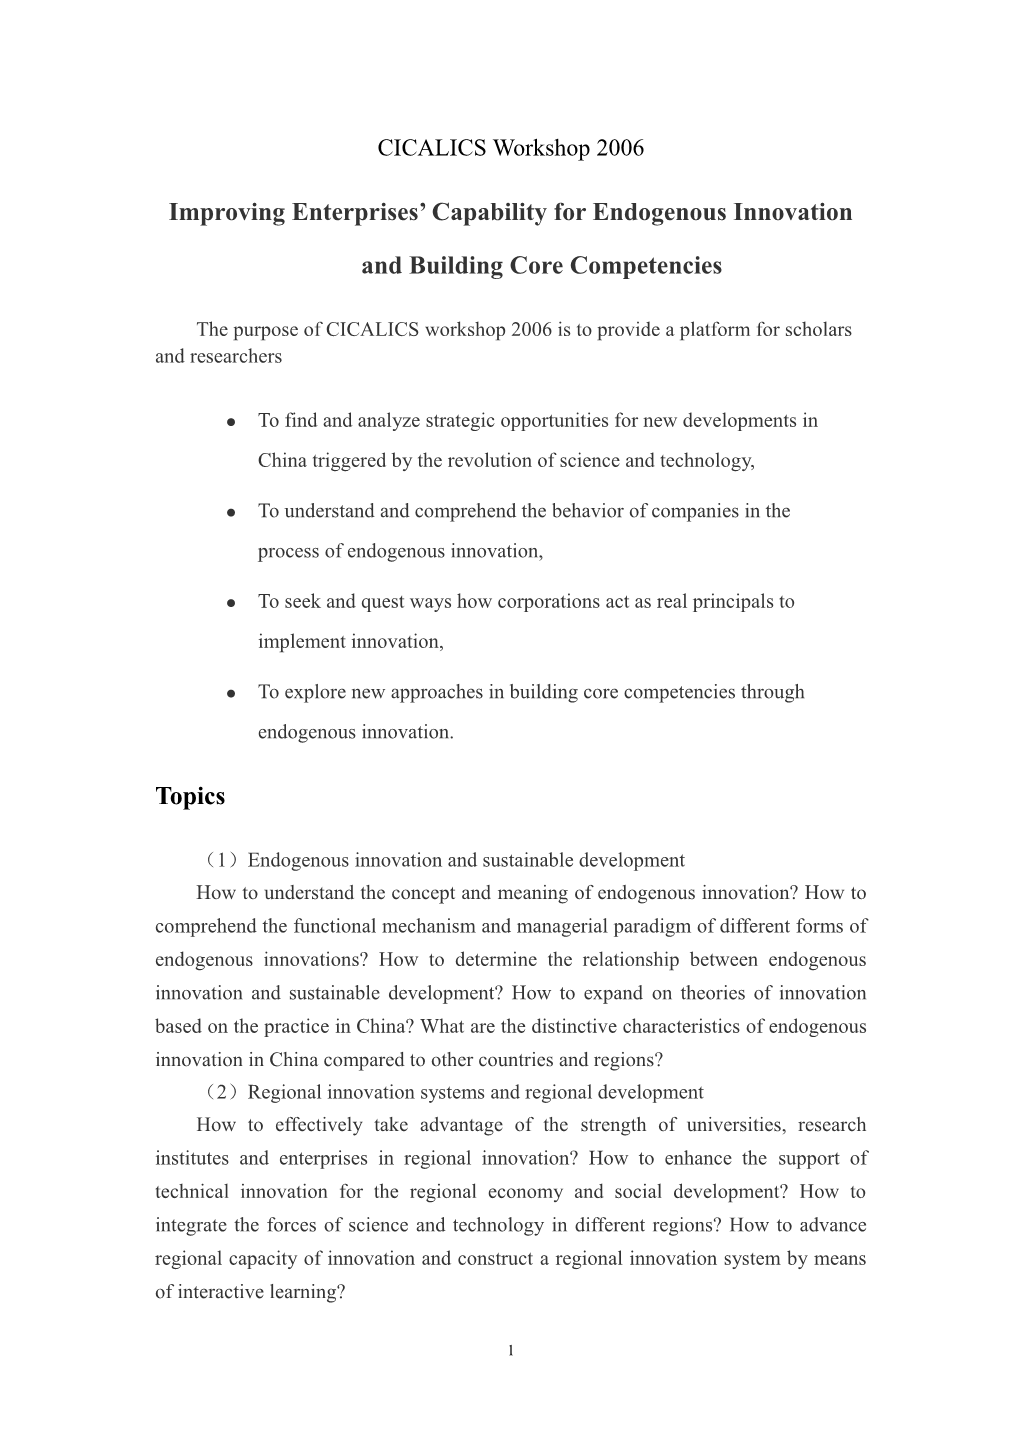 Improving Enterprises Capability for Endogenous Innovation and Building up Core Competencies